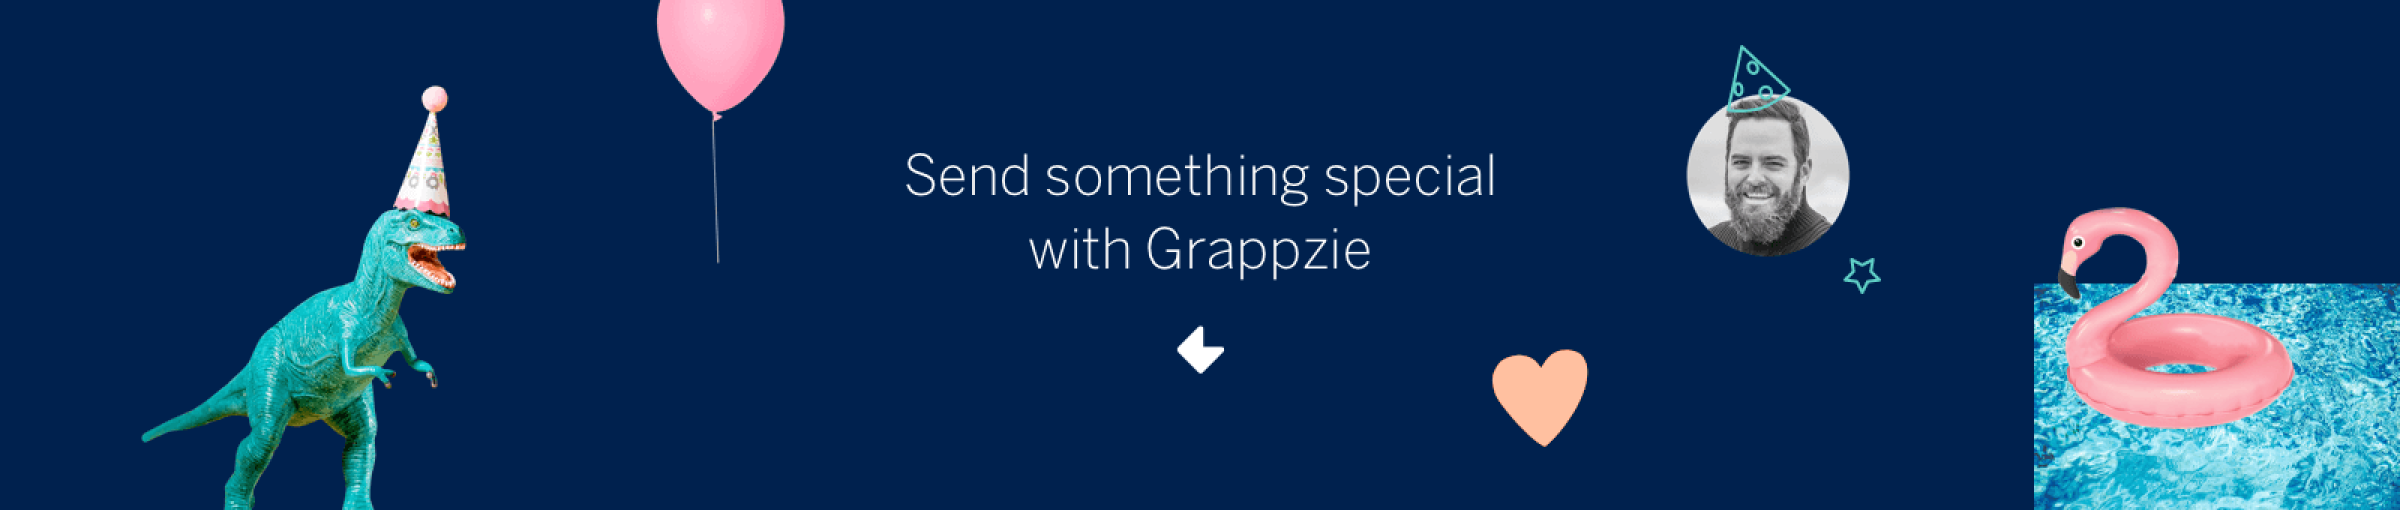 Grappzie slogan: "Send something special with Grappzie"